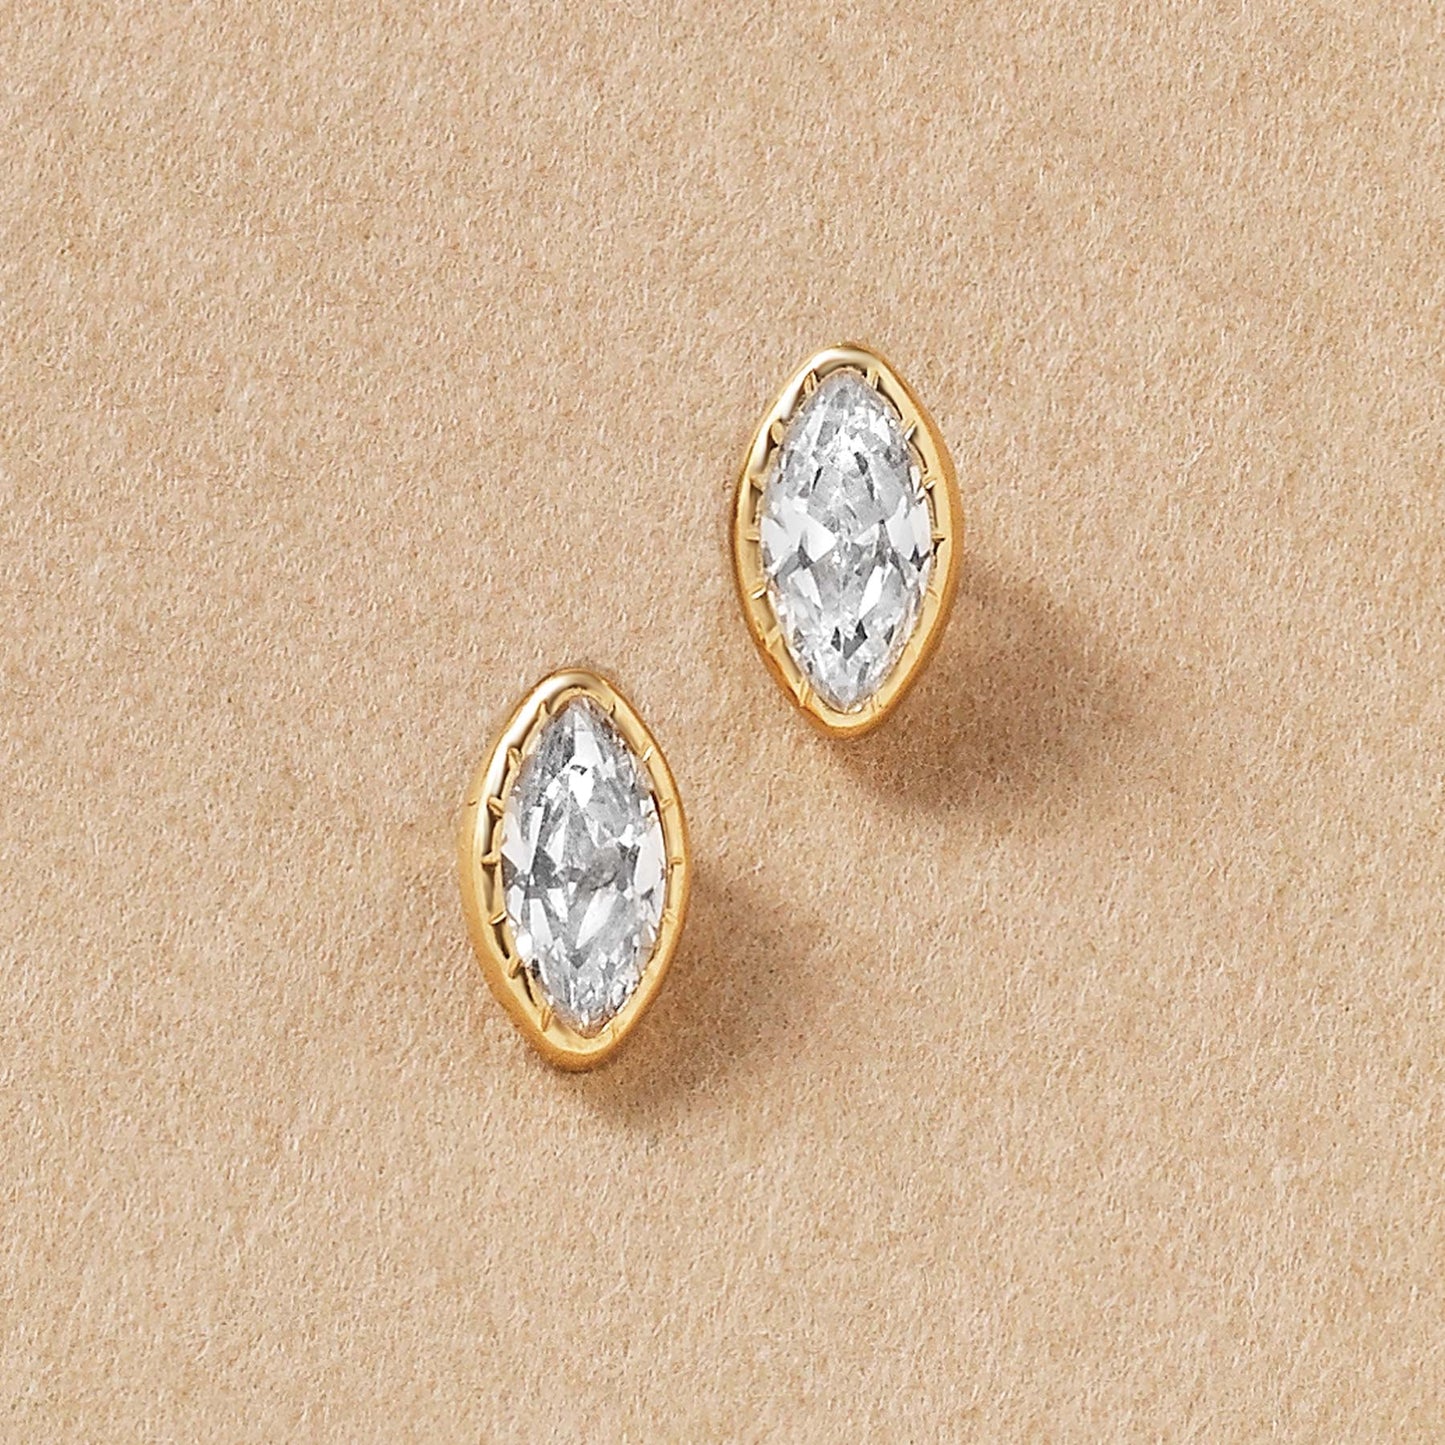 [Second Earrings] 18K Yellow Gold Marquise Cut Earrings - Product Image